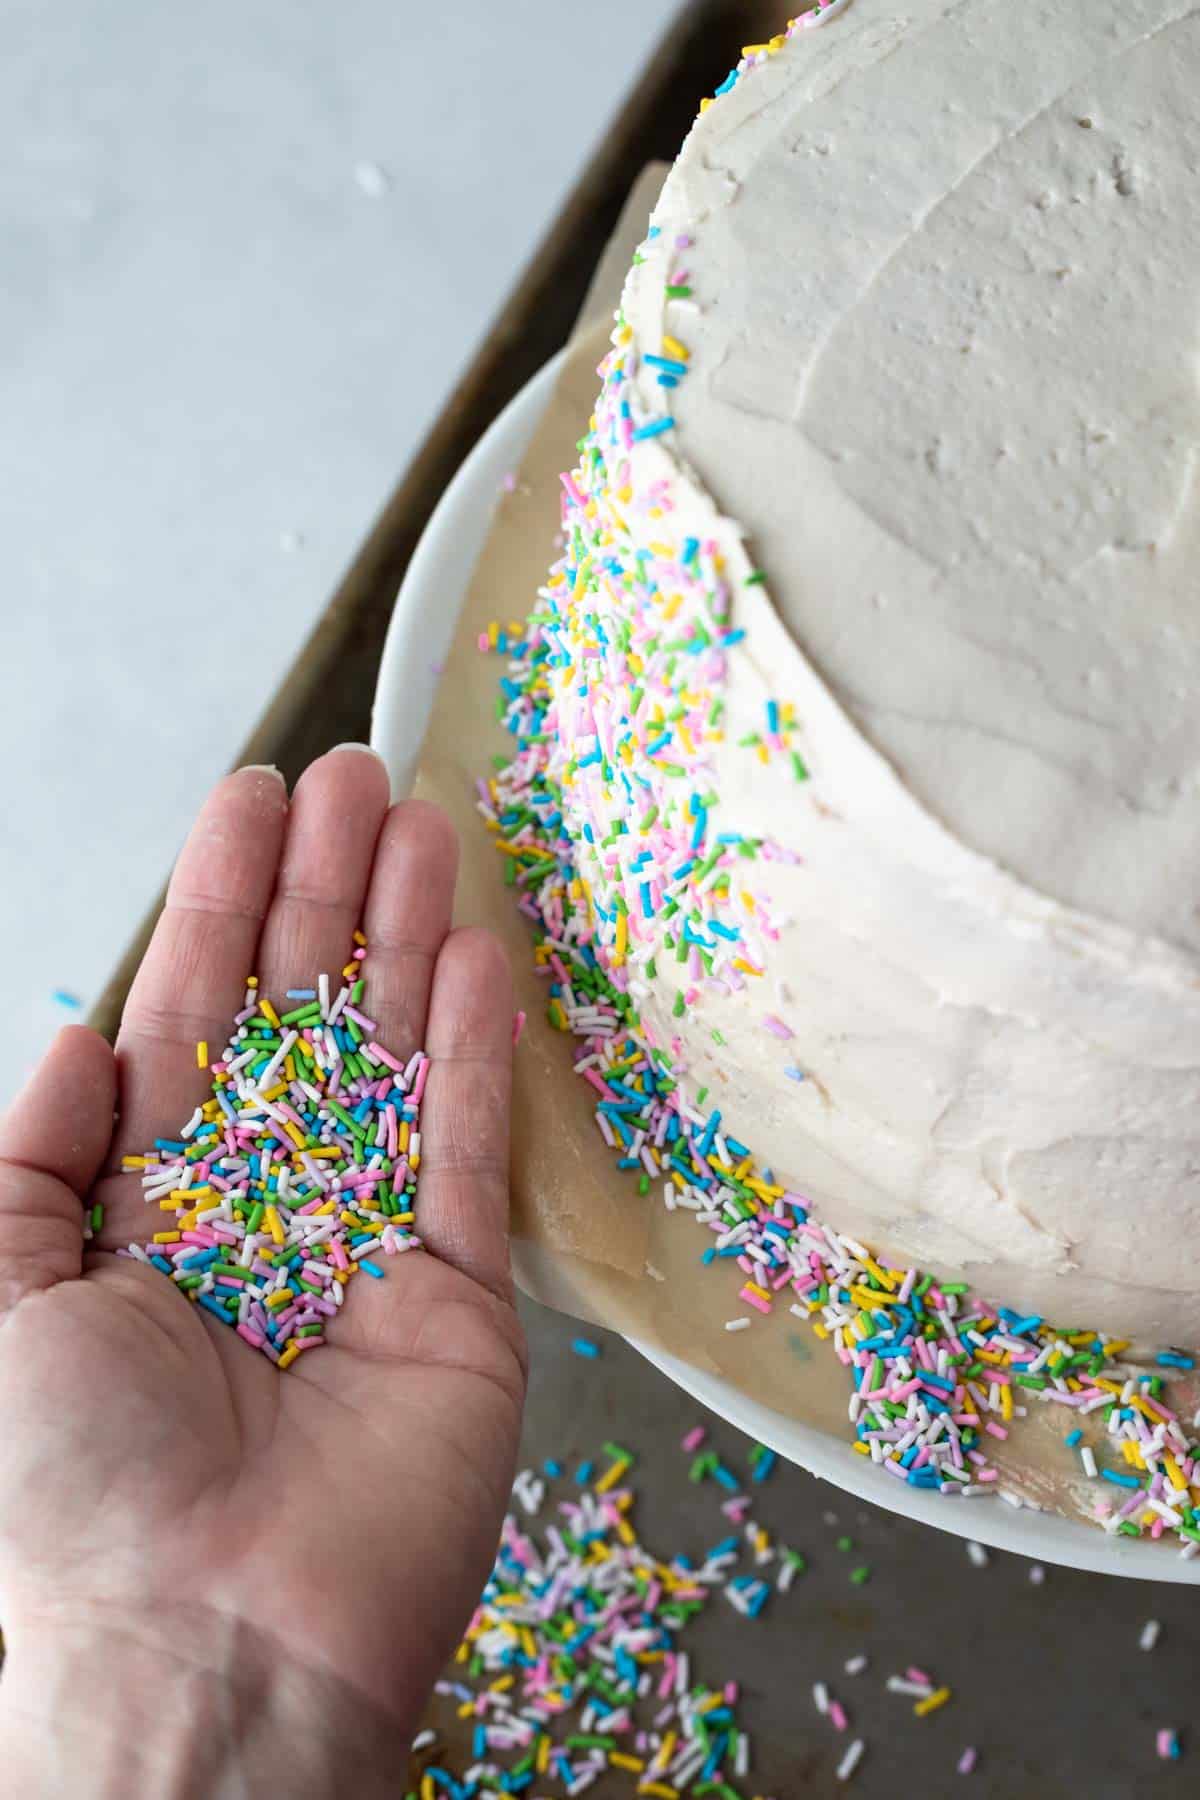 A hand holding a palmful of sprinkles ready to apply to the sides of the cake.